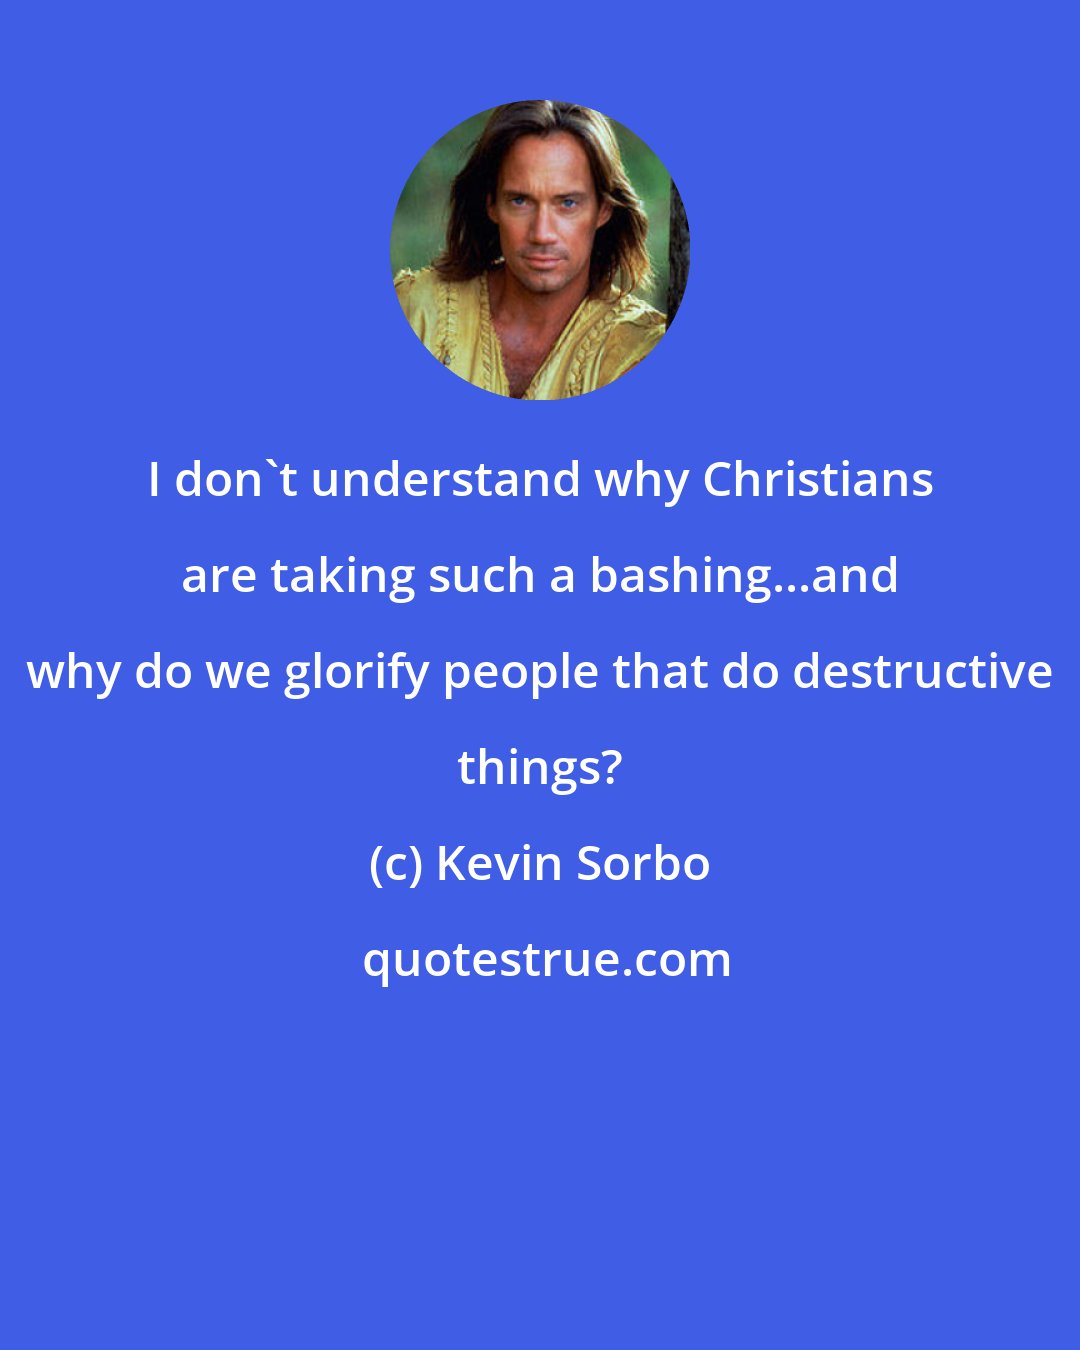 Kevin Sorbo: I don't understand why Christians are taking such a bashing...and why do we glorify people that do destructive things?